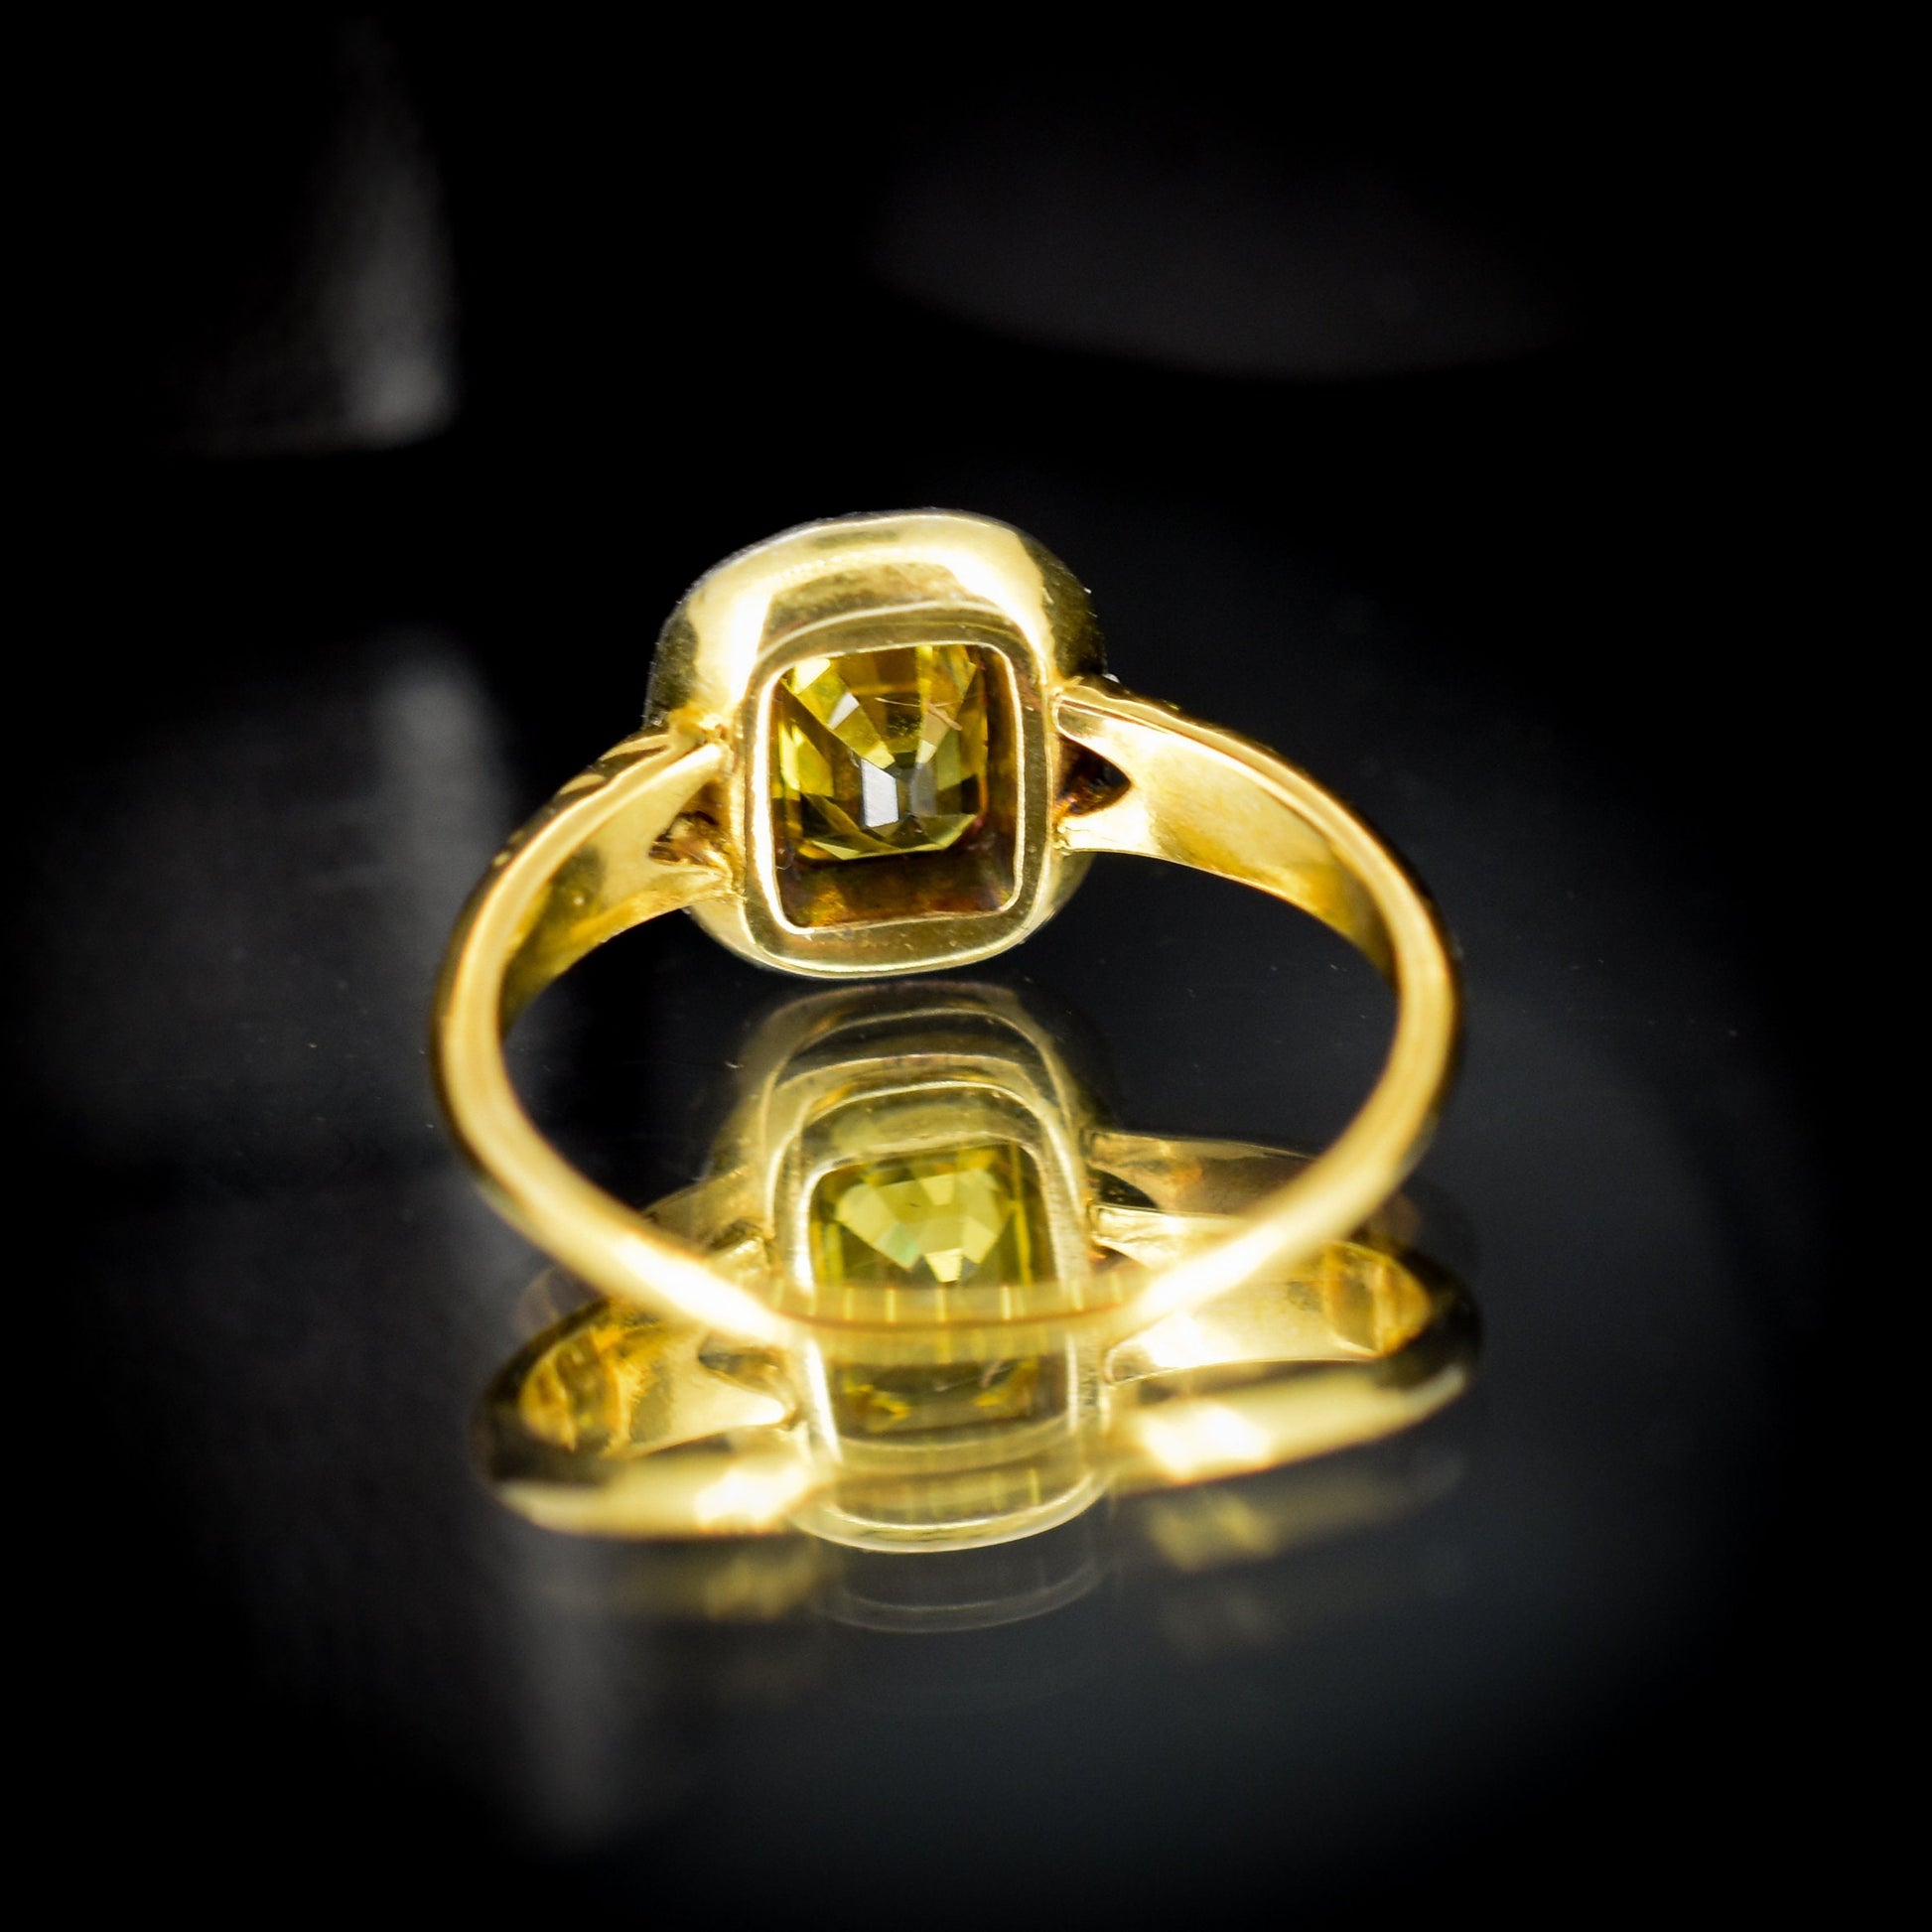 Yellow Sapphire and Diamond Halo Yellow Gold Ring | Antique Style